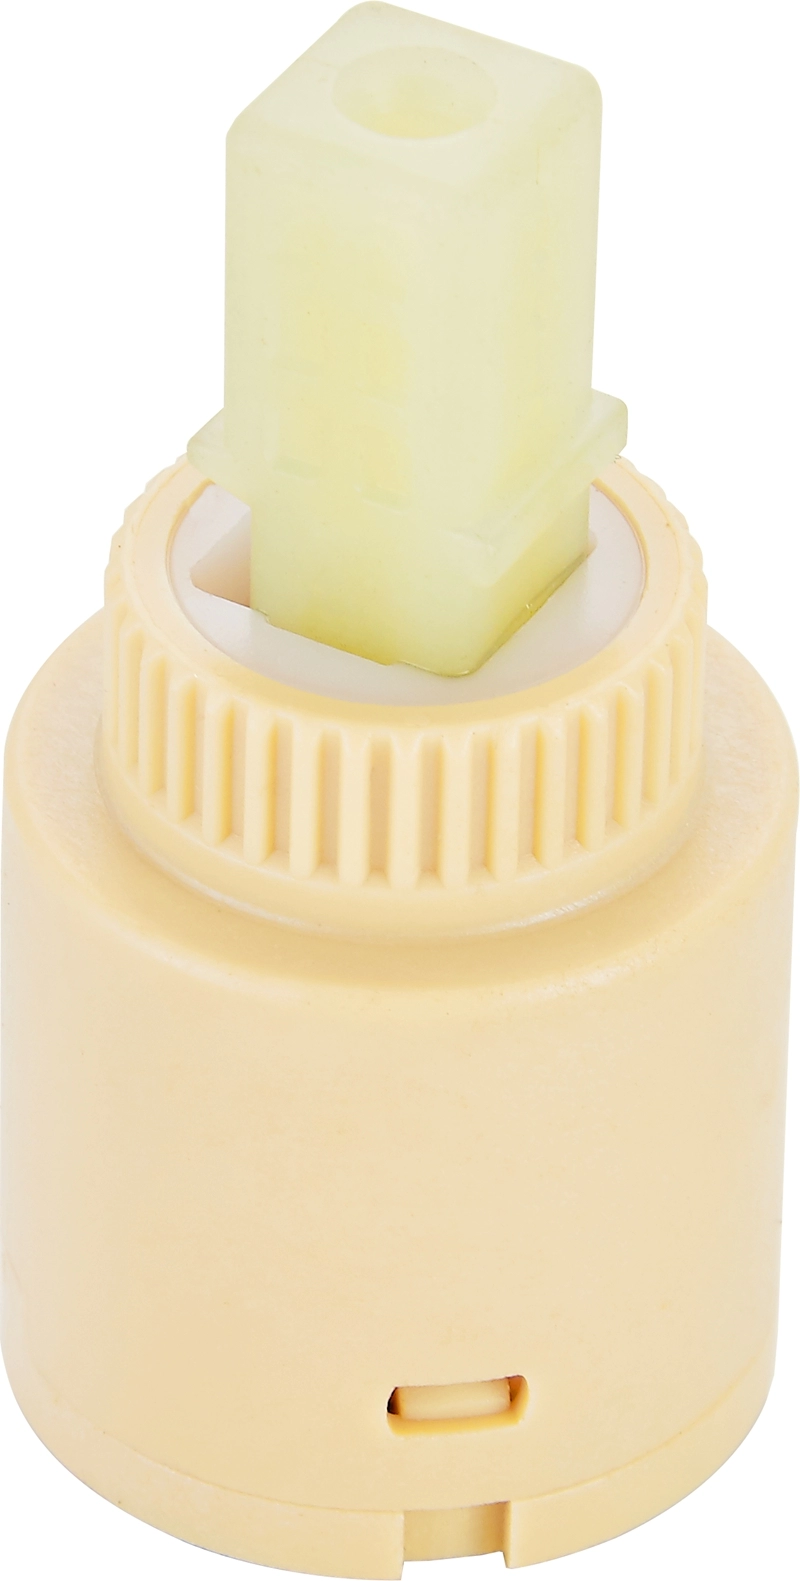 High quality 25mm low torque ceramic cartridge without distributor